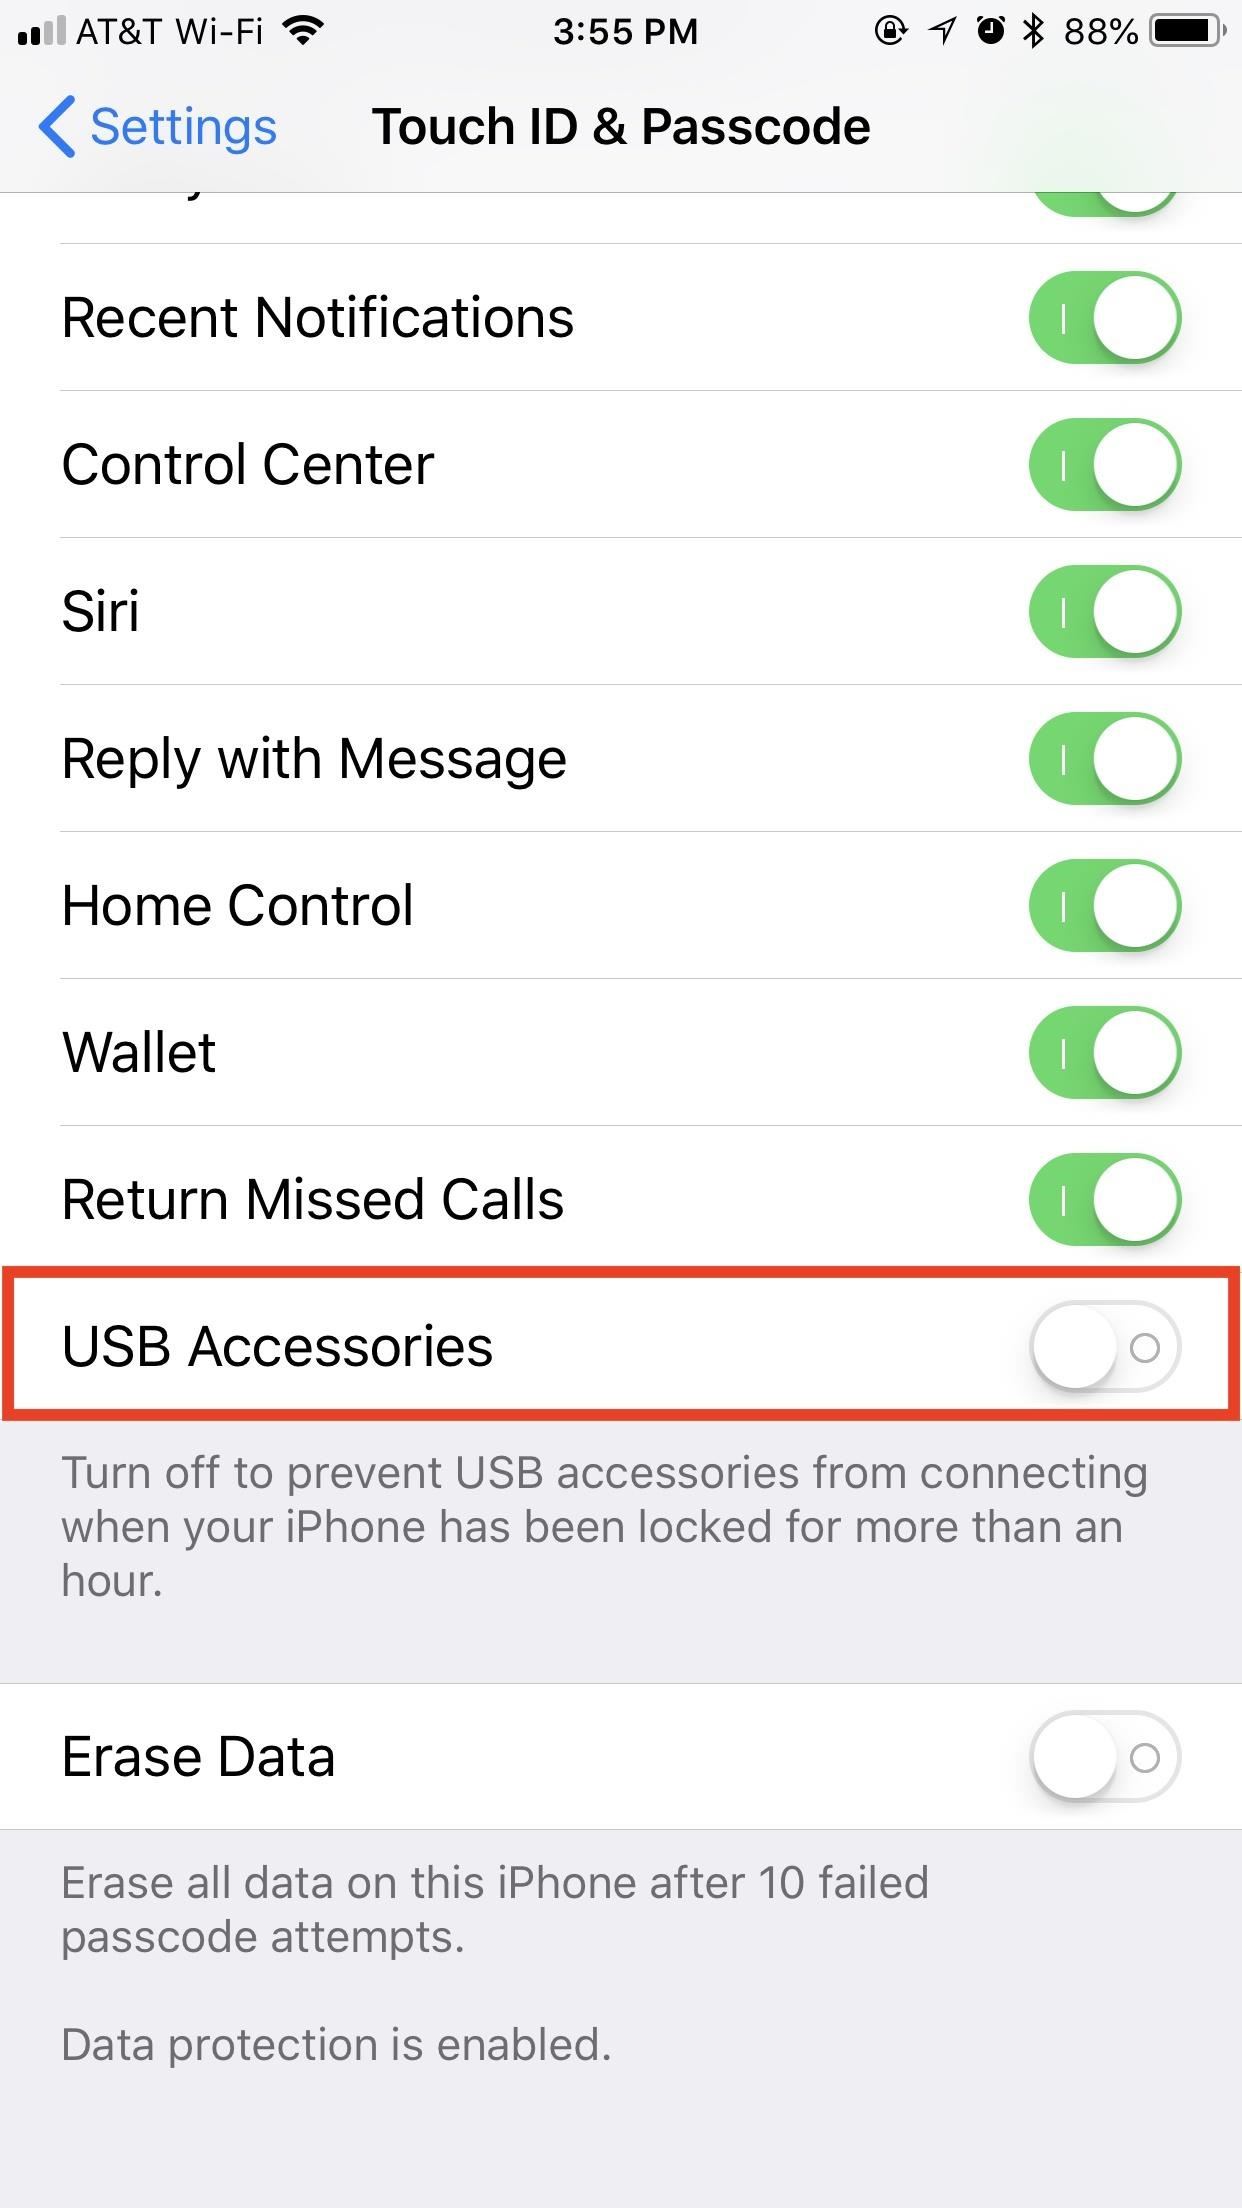 How to Keep Data-Thieving USB Accessories from Connecting to Your iPhone in iOS 11.4.1 & Higher